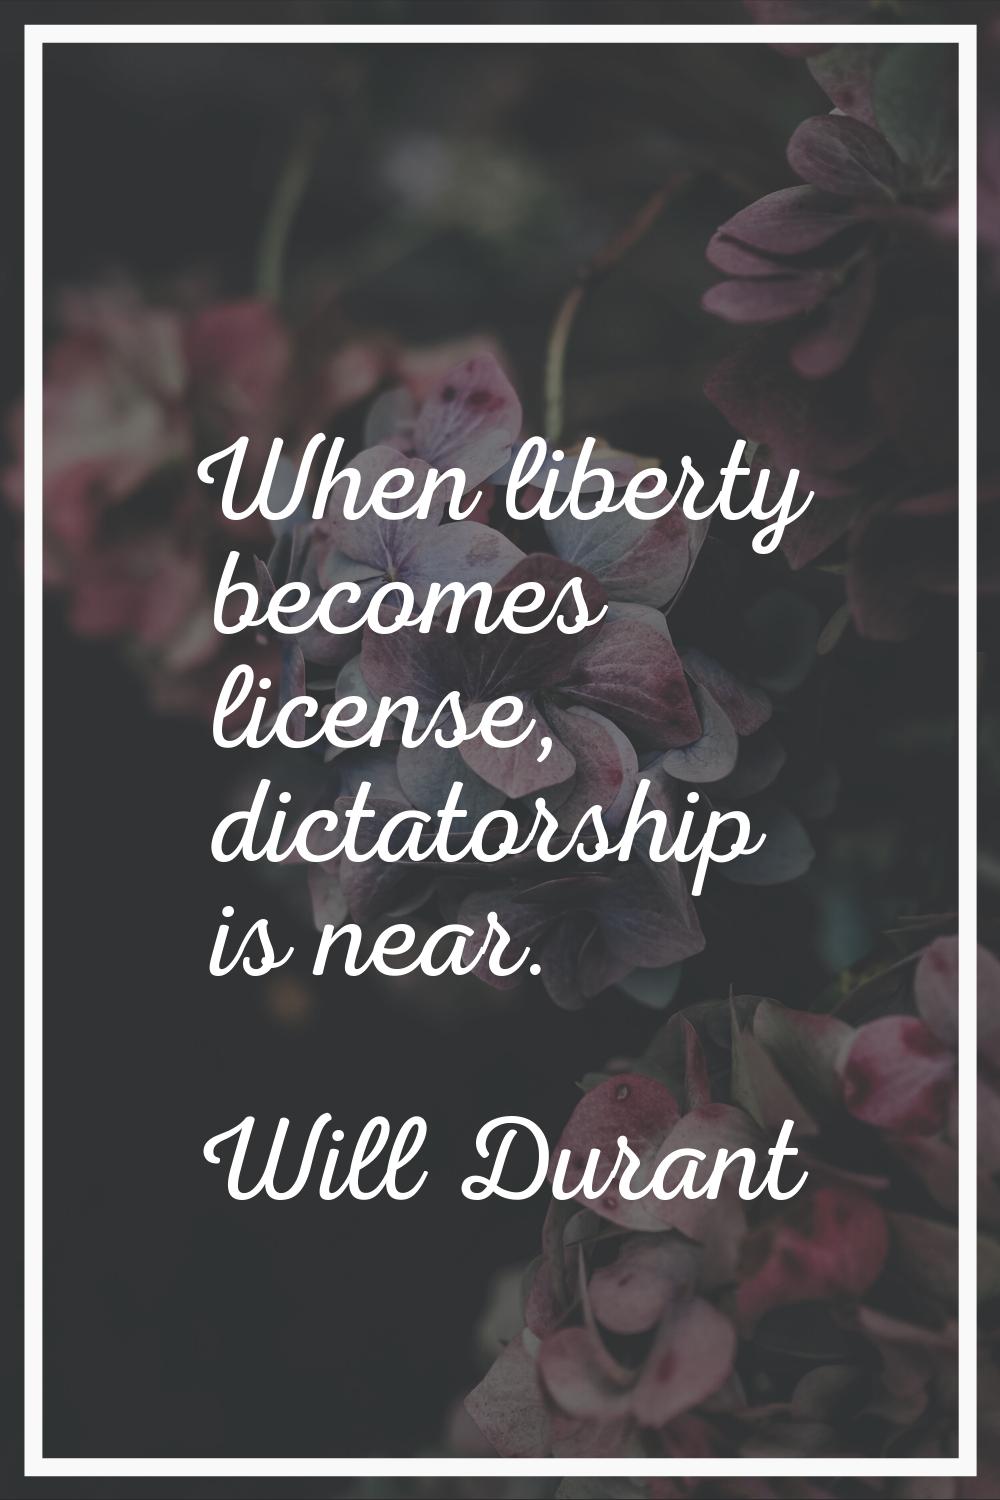 When liberty becomes license, dictatorship is near.